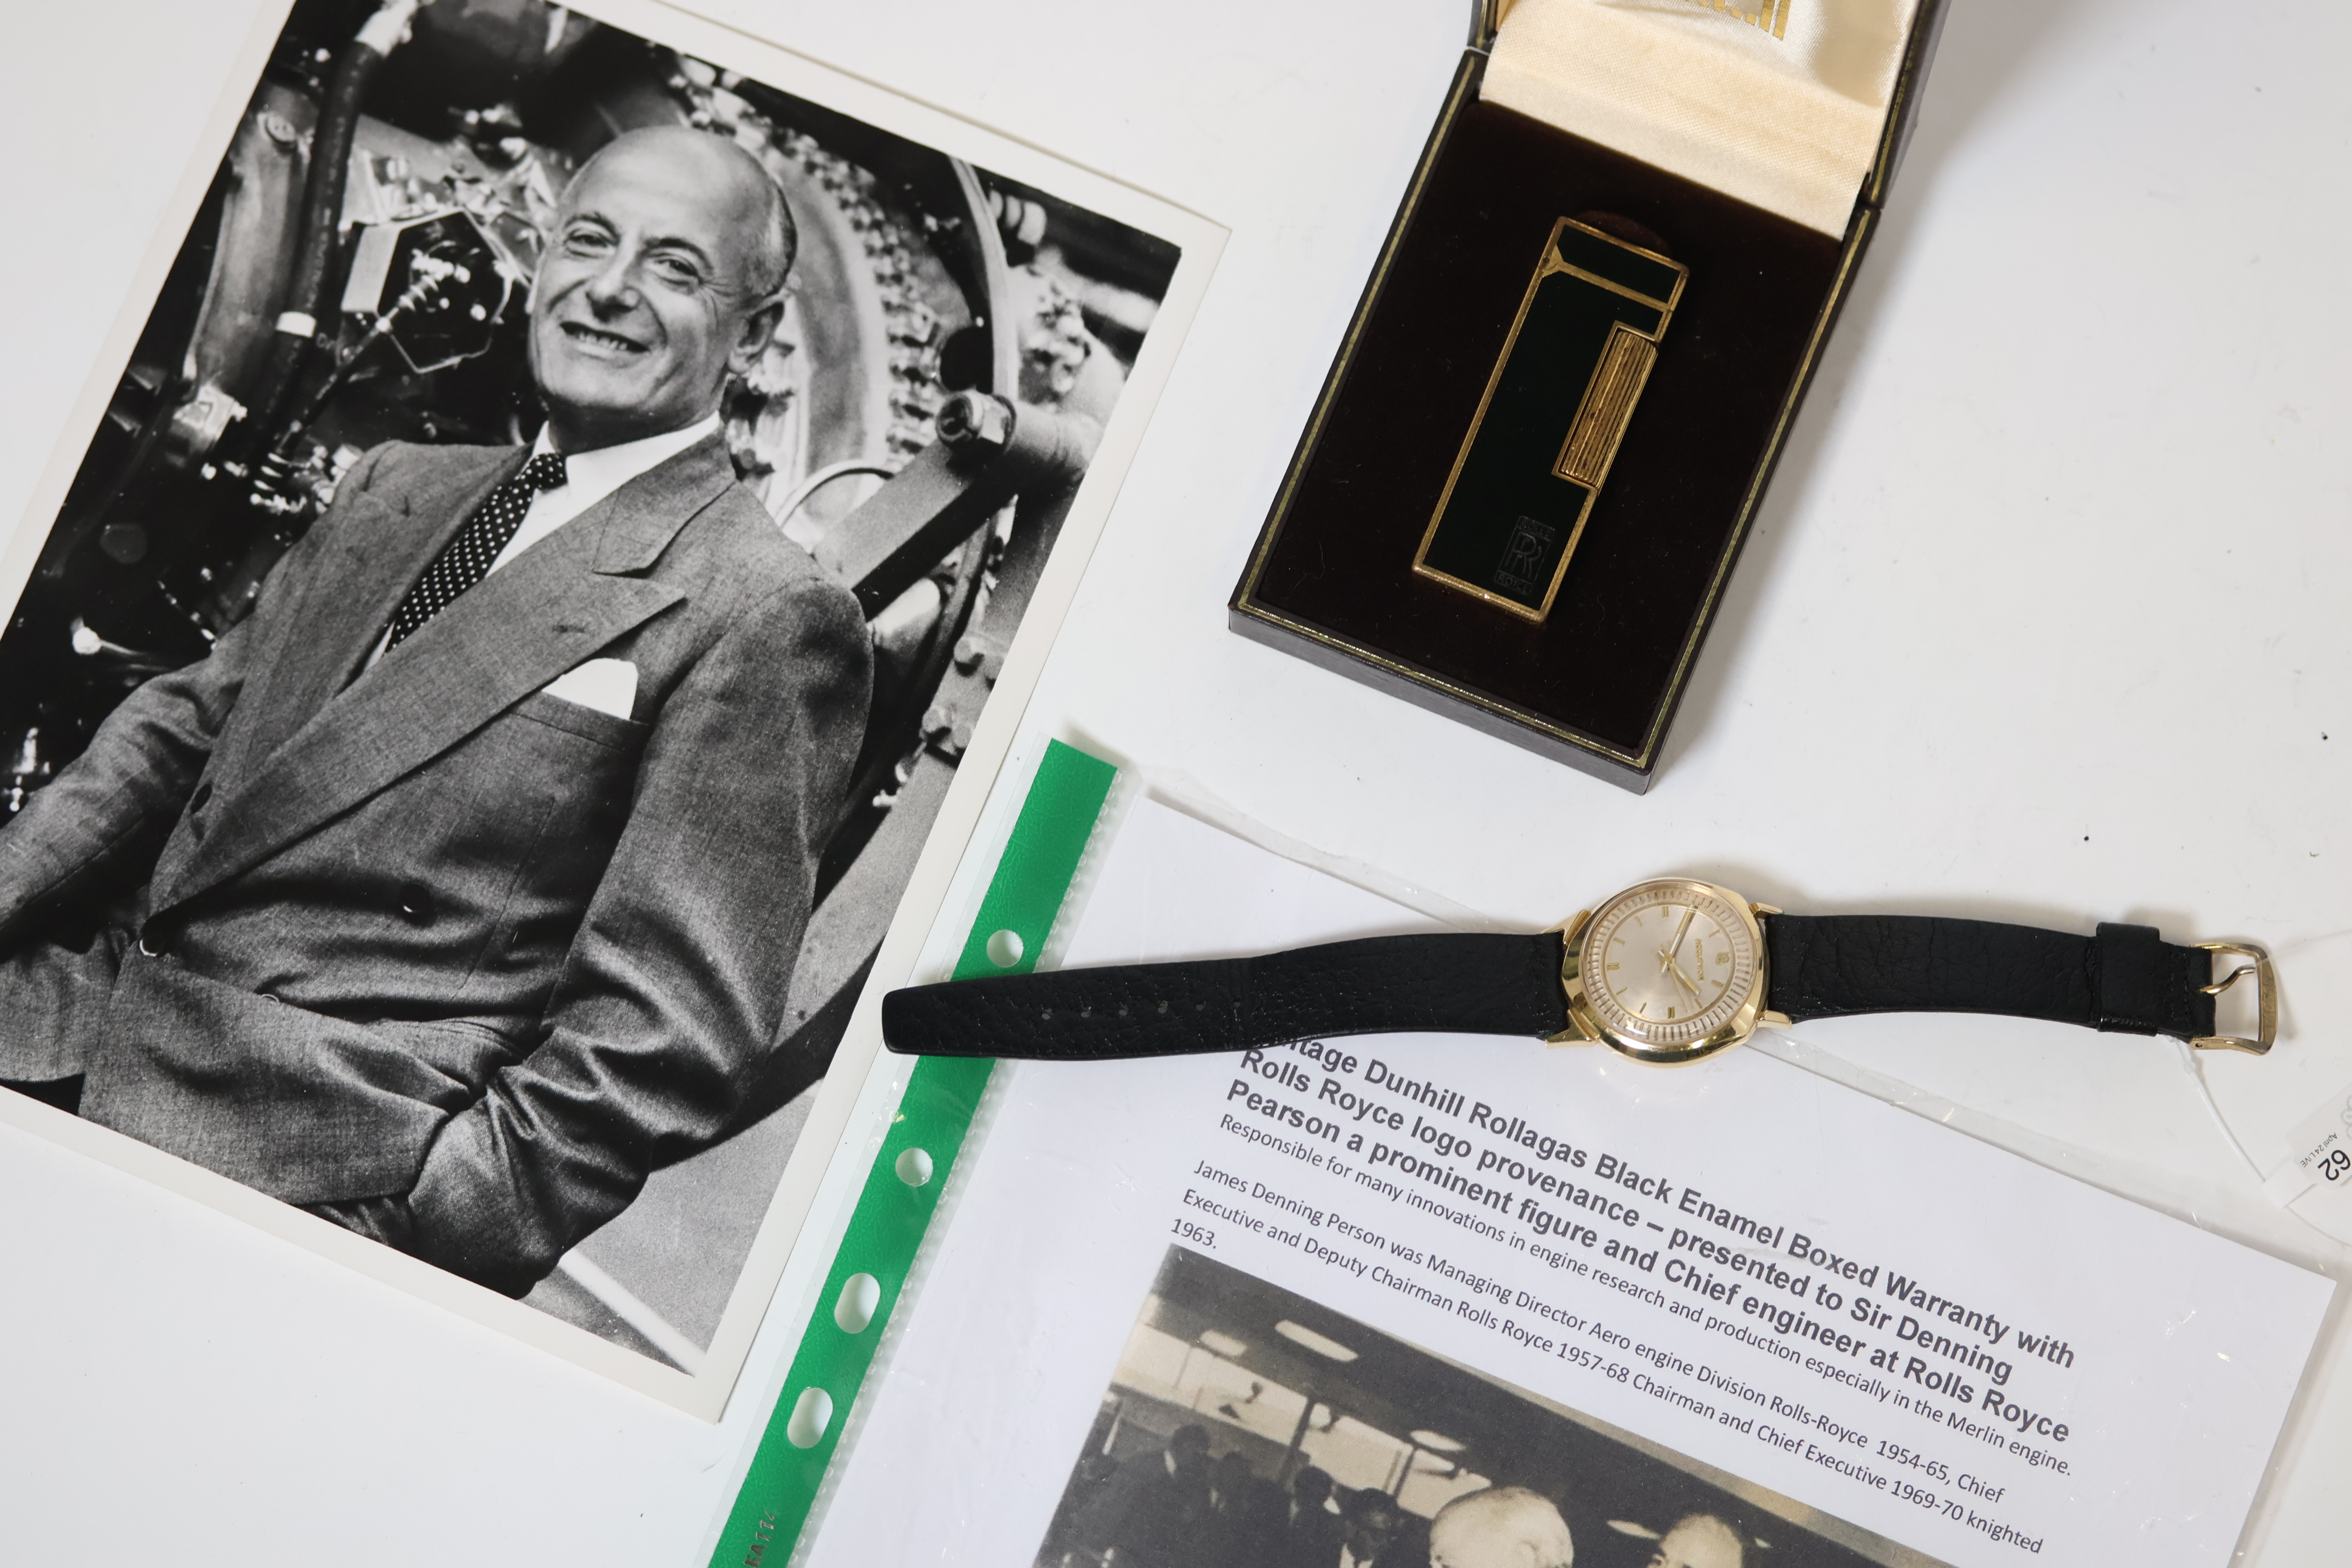 Possessions of Sir Denning Pearson, the Chief Engineer at Rolls Royce - Image 7 of 10